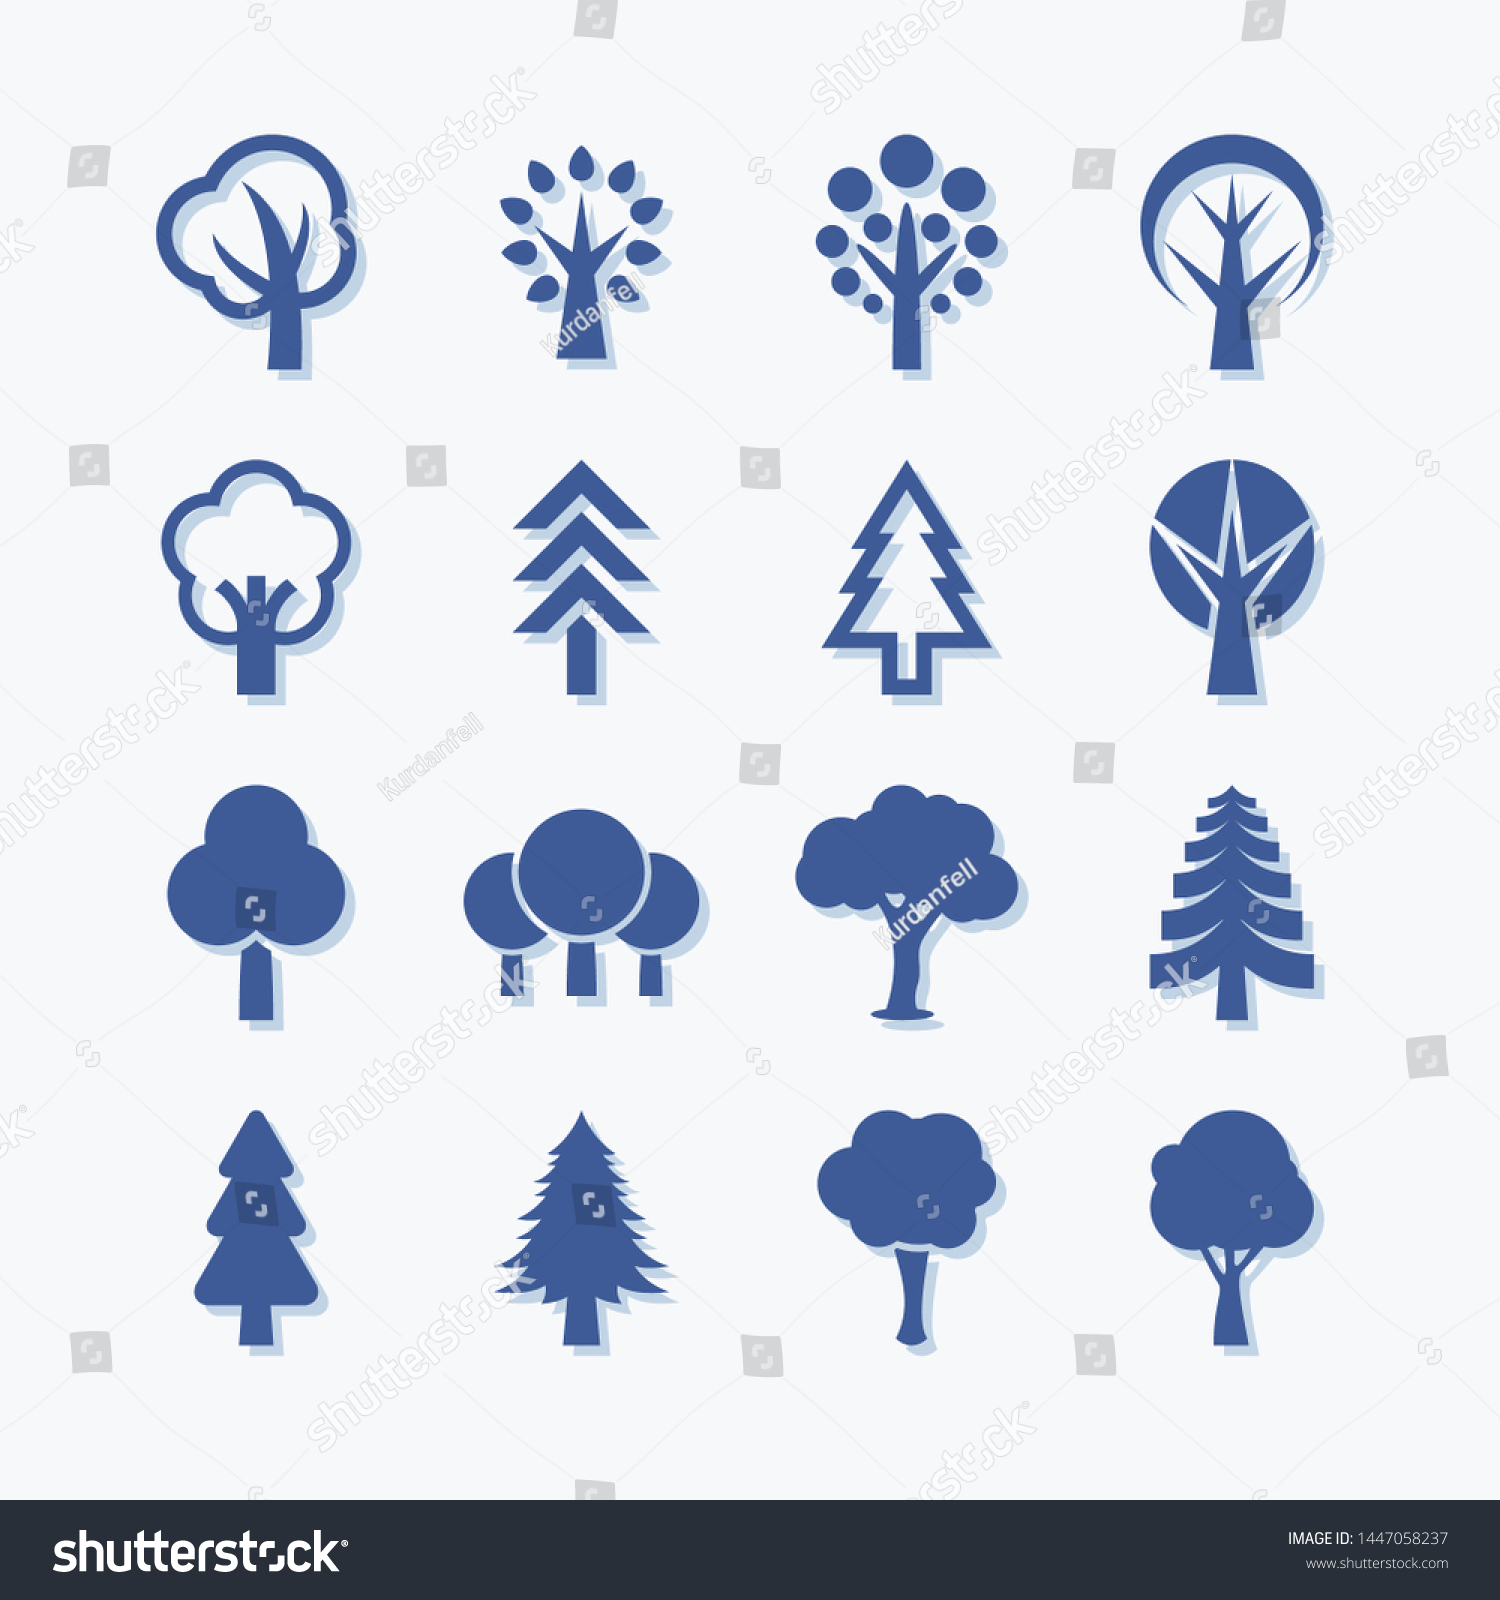 Flat vector trees set. Pictogram style. Flat forest and park icon - stock vector. #1447058237